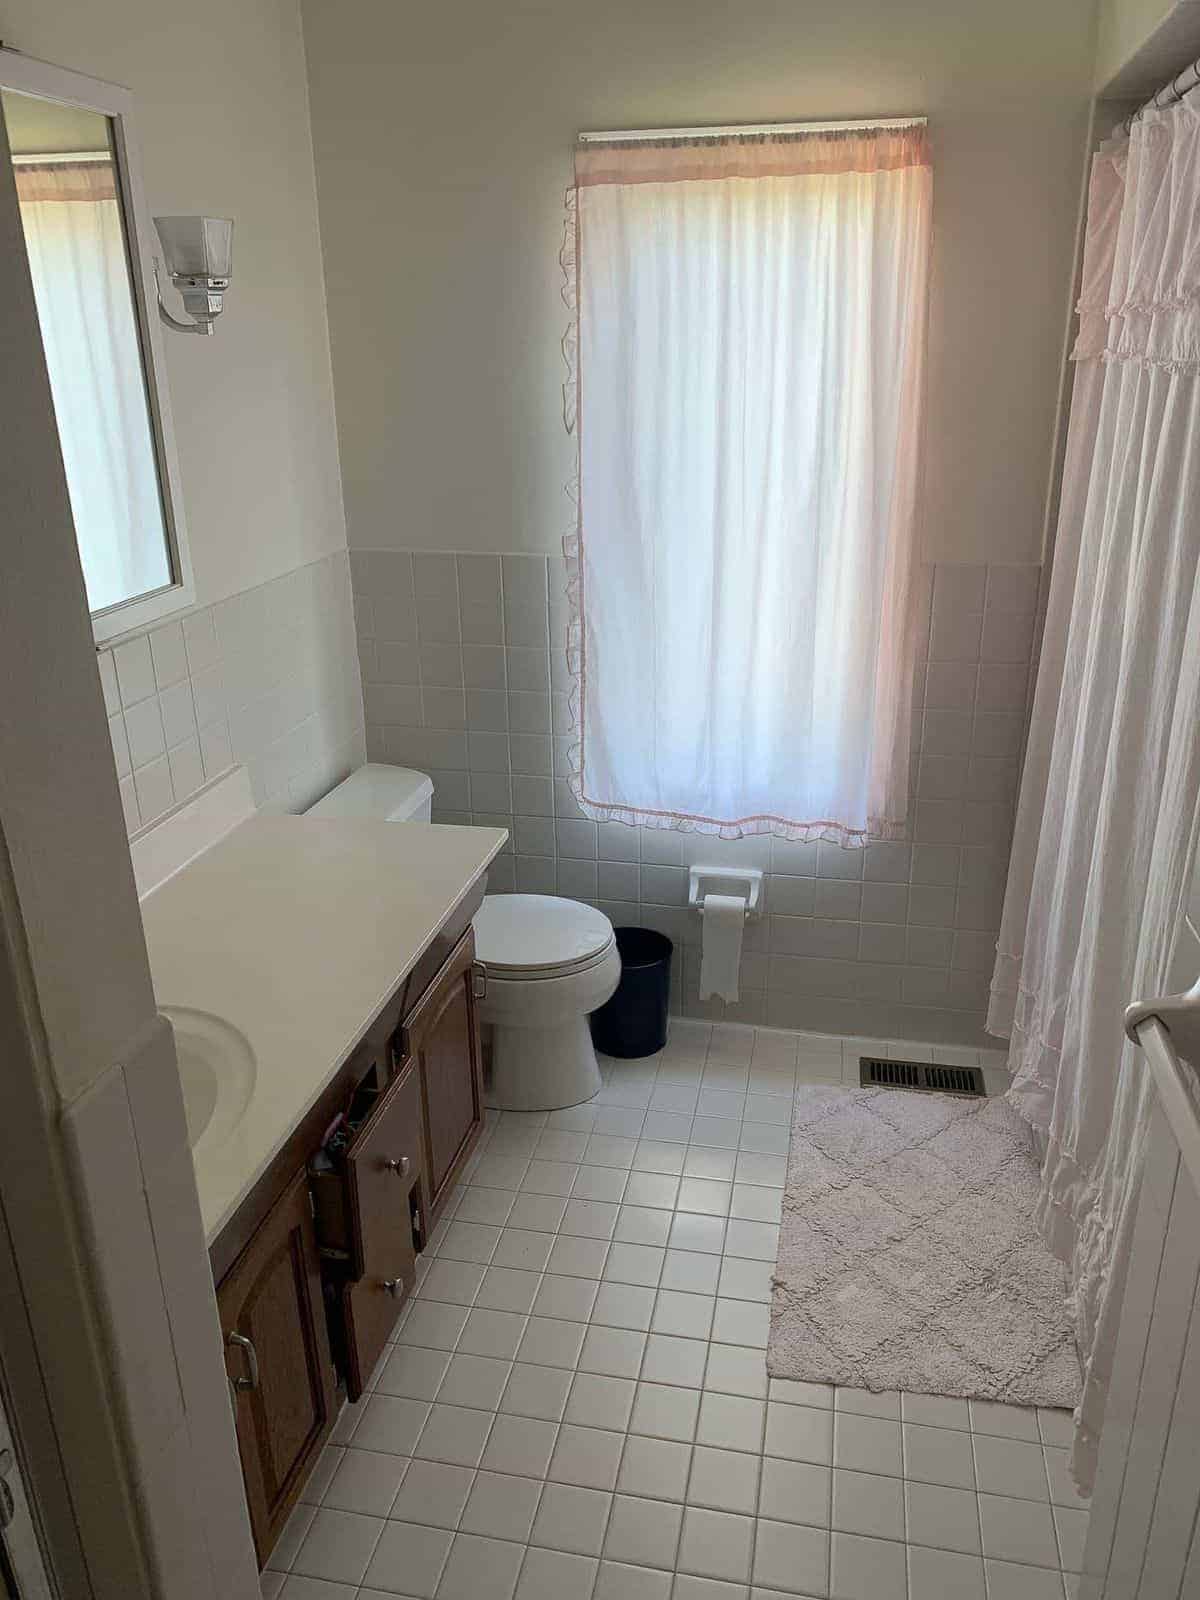 Dated 70's bathroom with dark cabinet, dated tile and no lighting. 